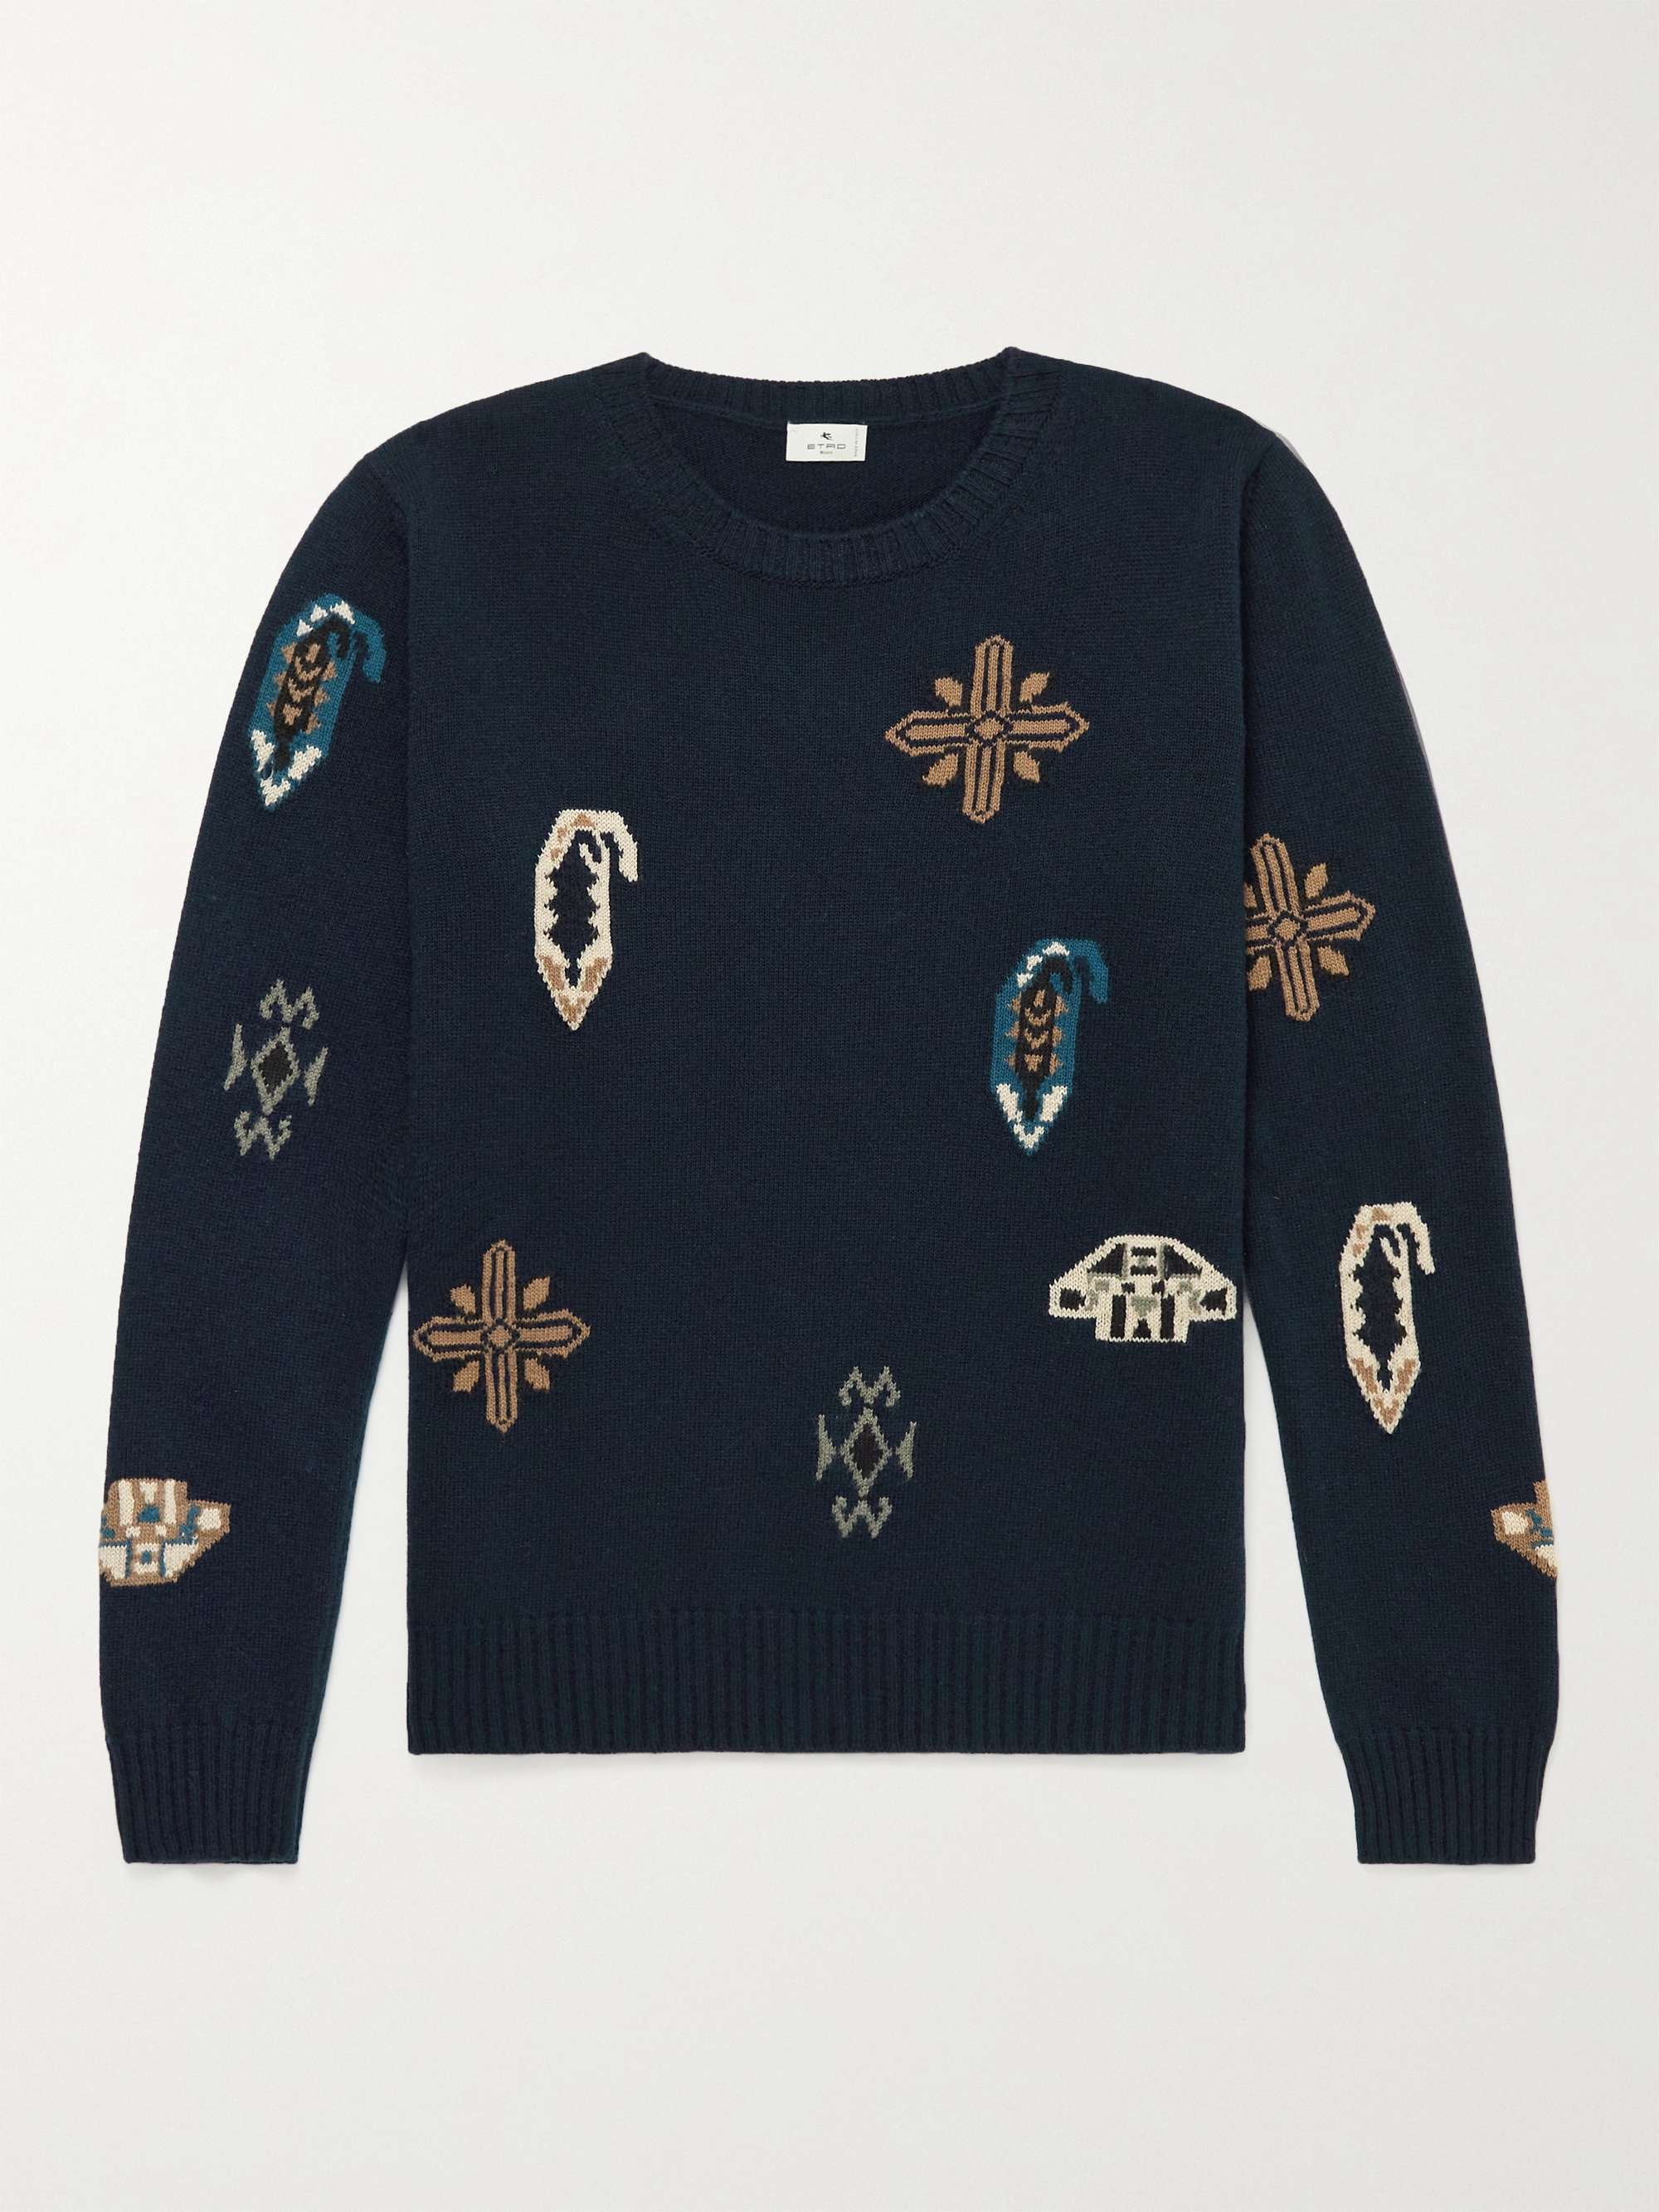 ETRO Intarsia Wool and Cotton-Blend Sweater